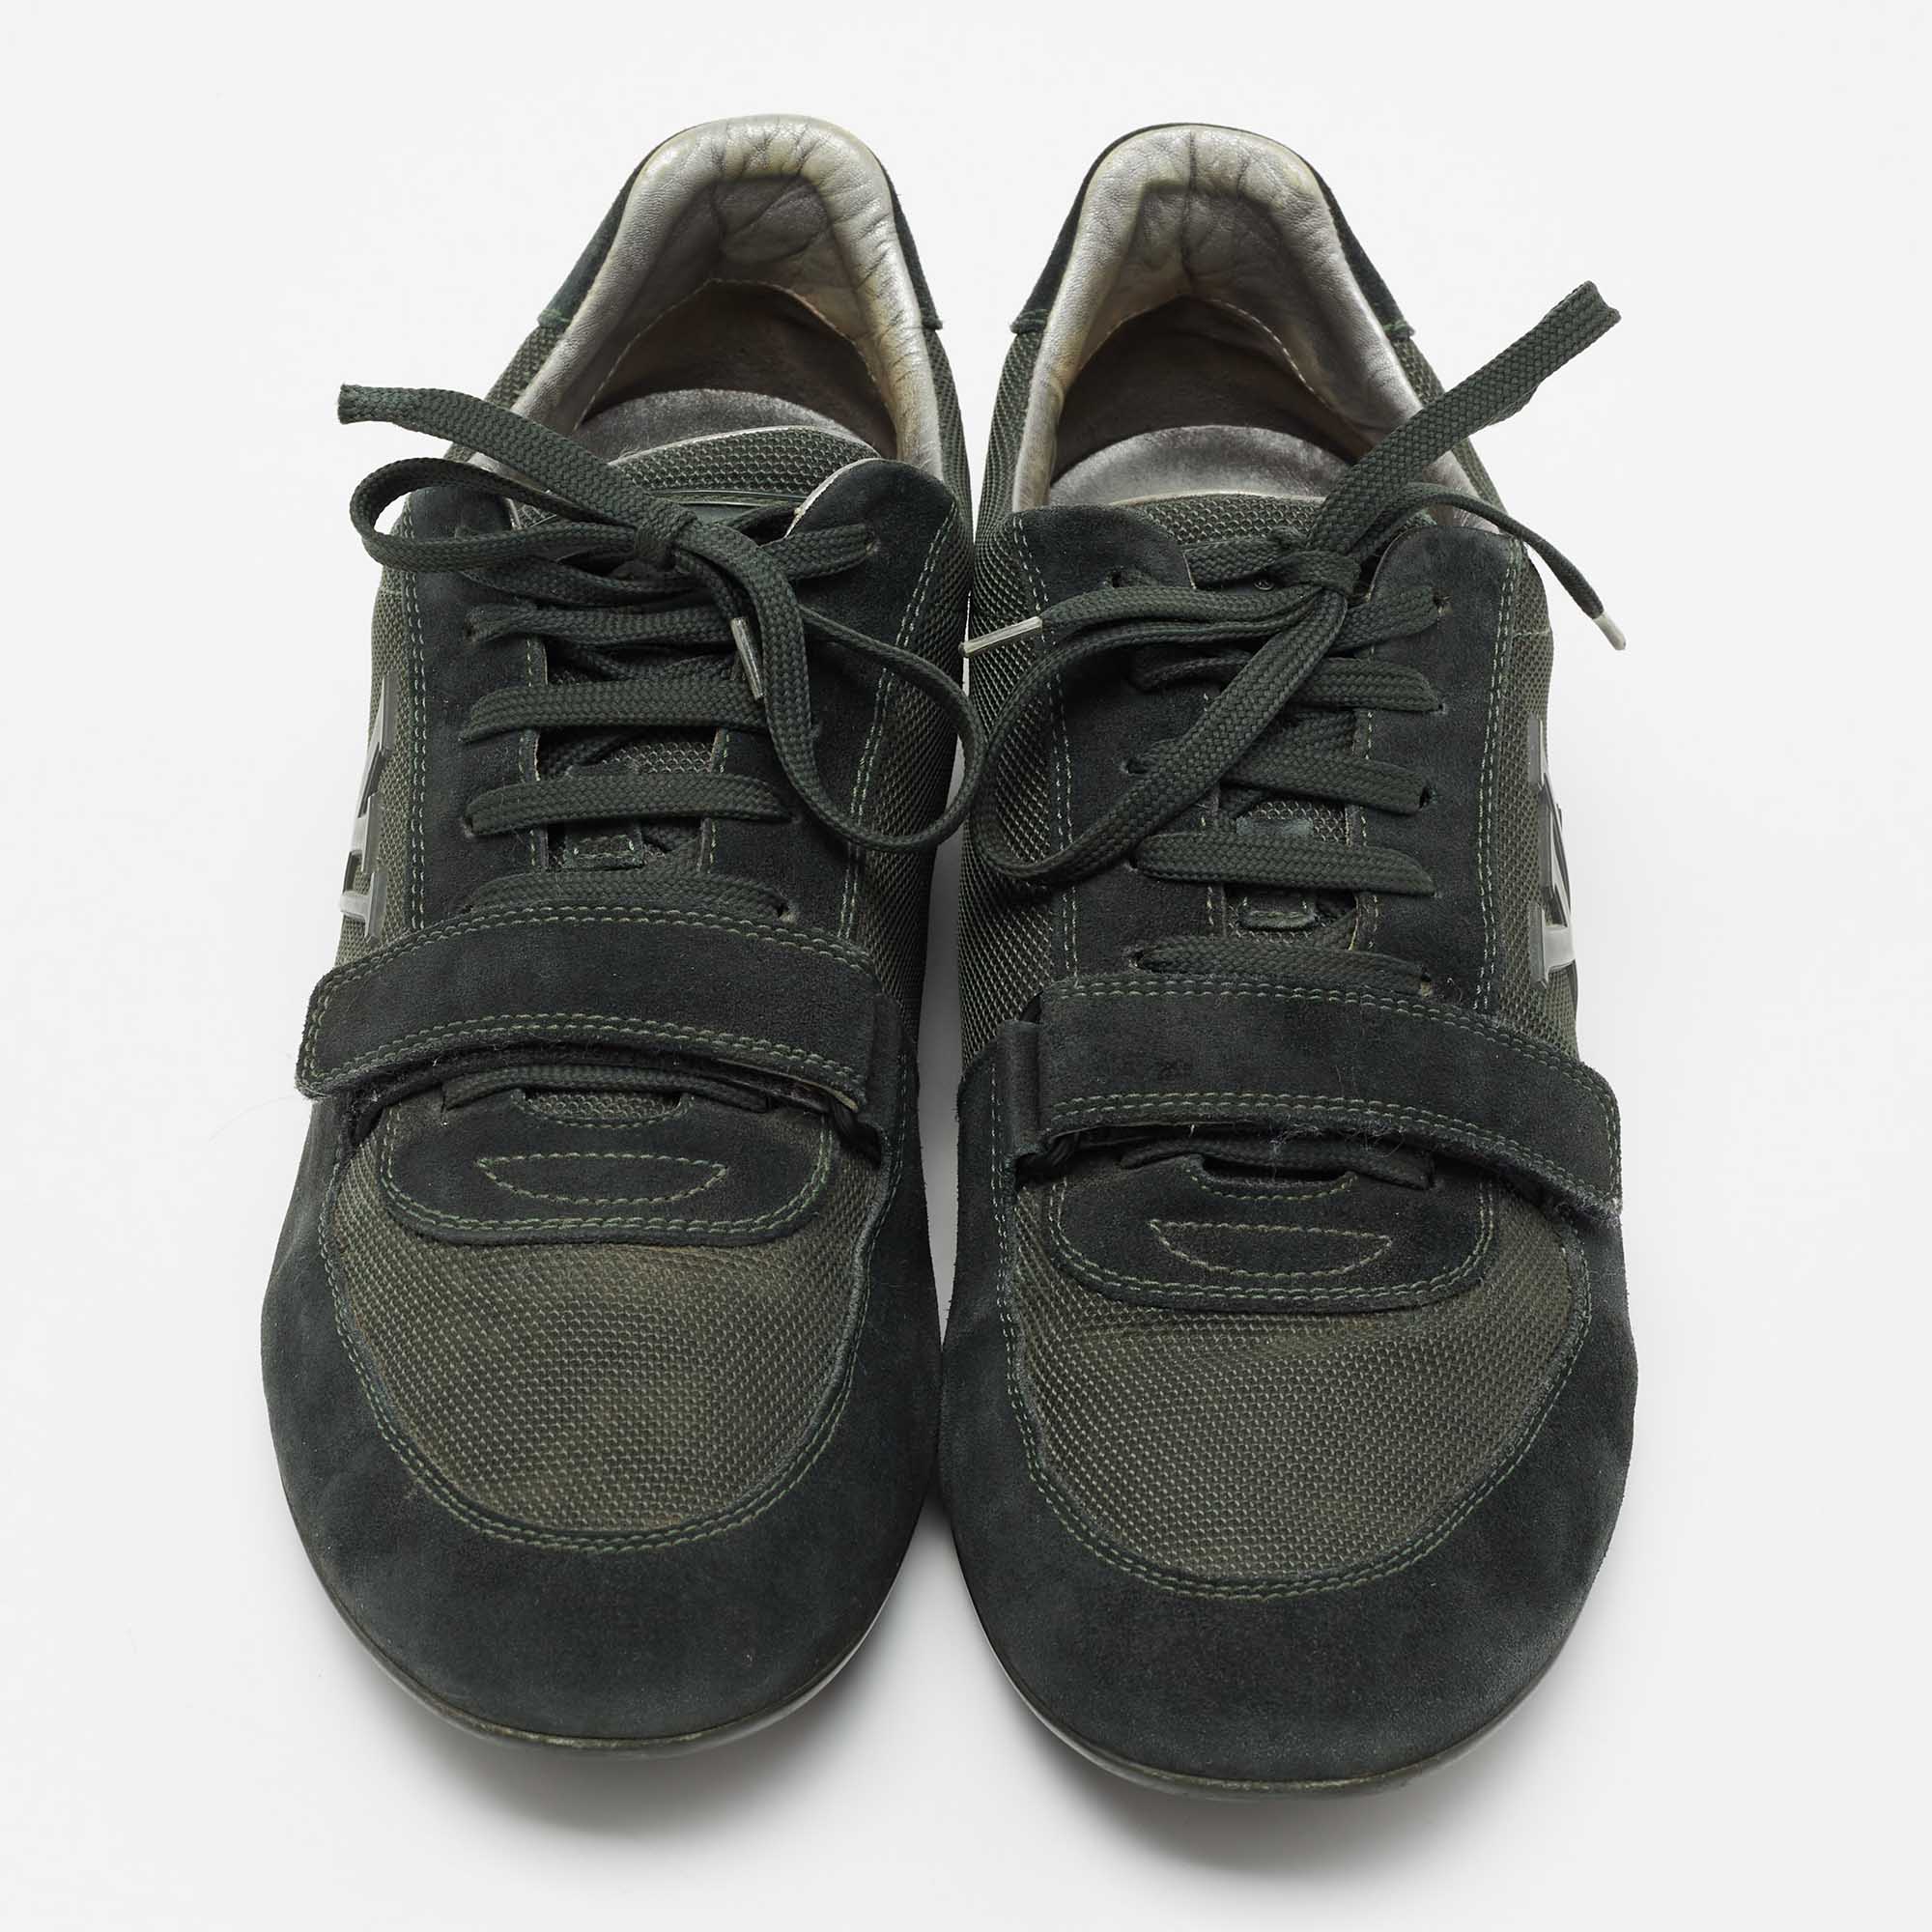 Louis Vuitton Green Suede And Mesh Lace Up Sneakers Size 42.5 Louis Vuitton